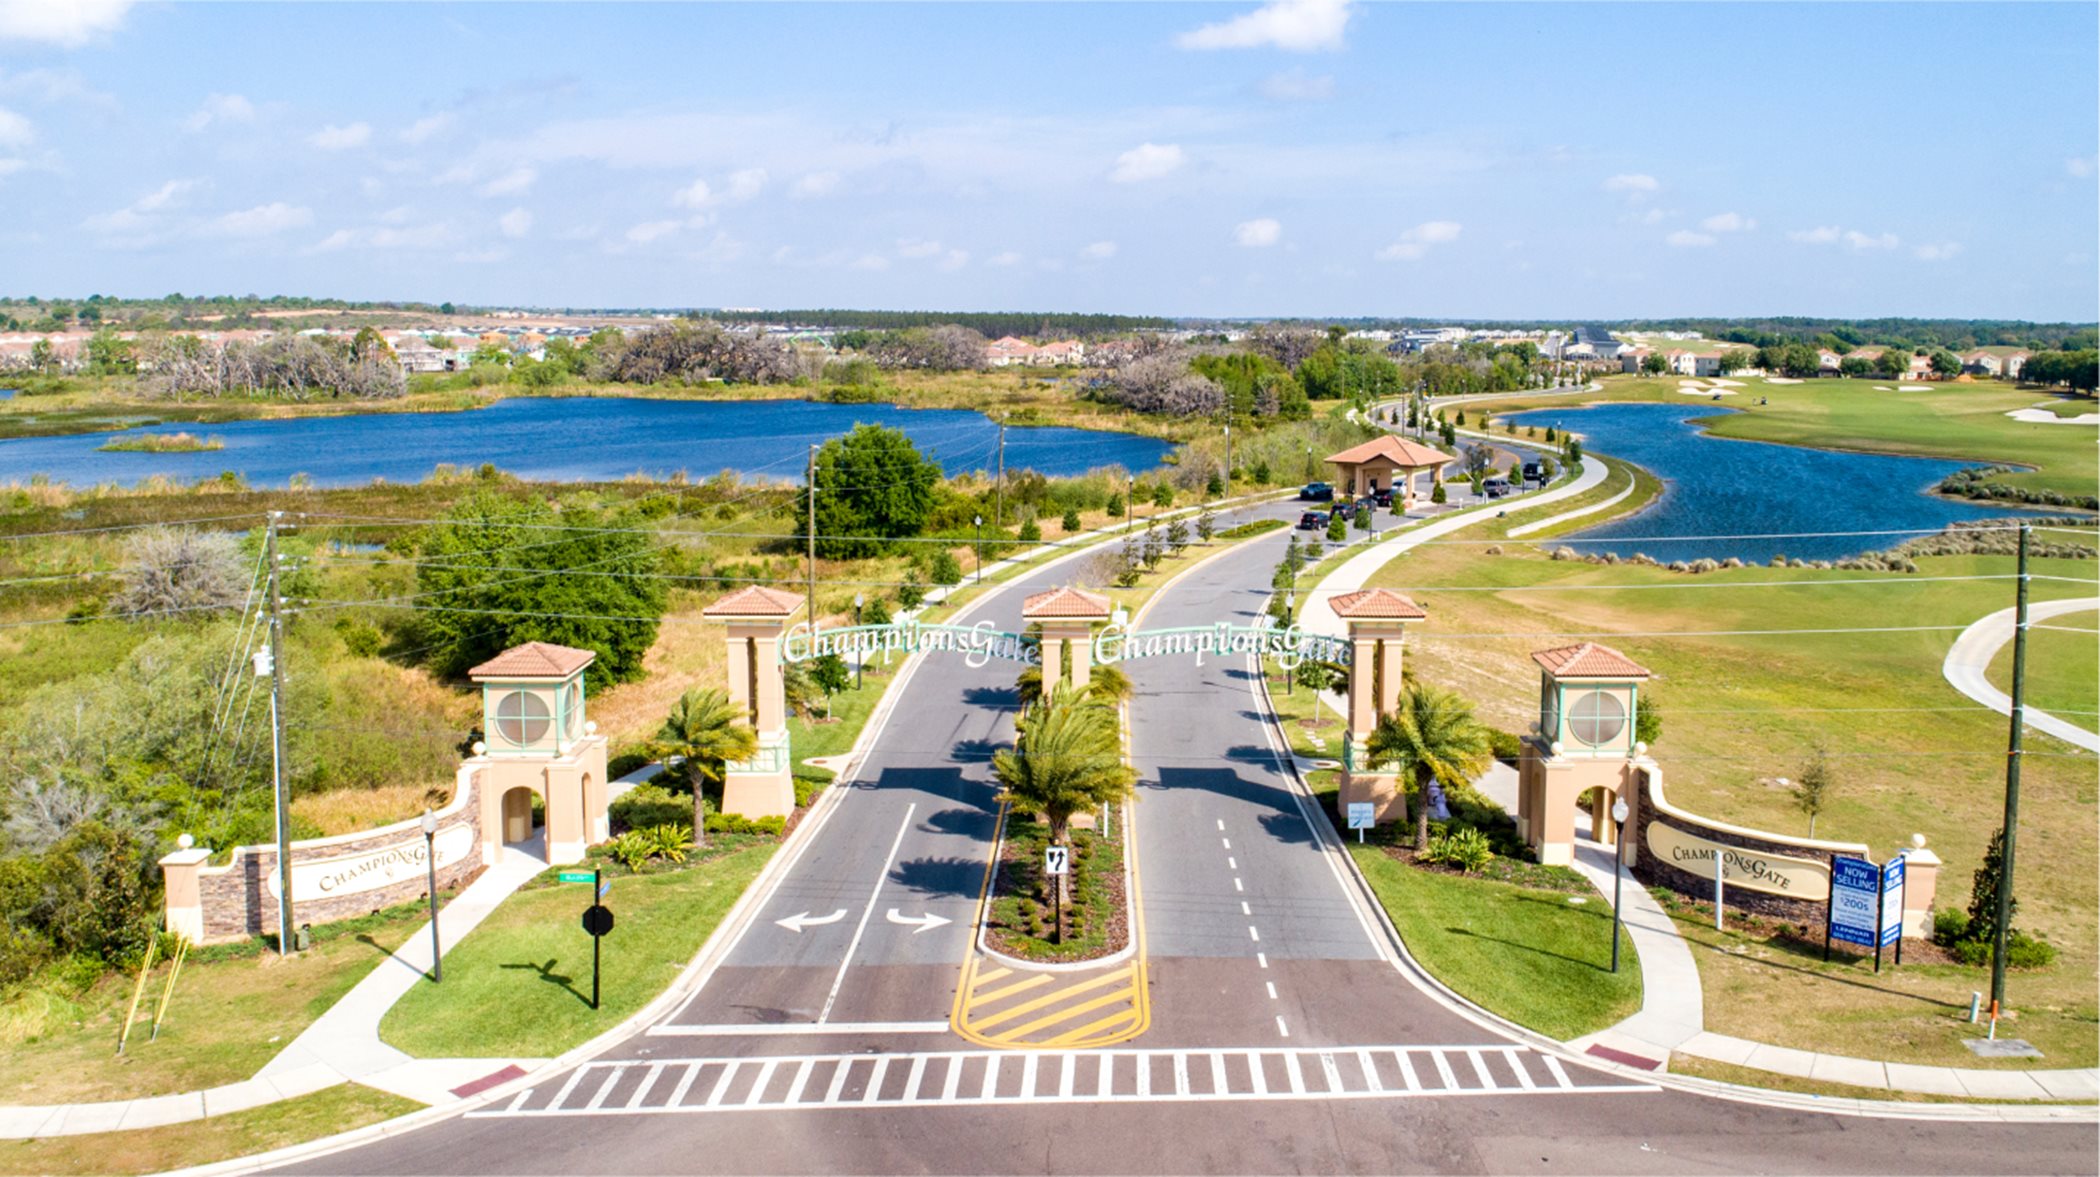 ChampionsGate Master Planned Community Security Gated Entry